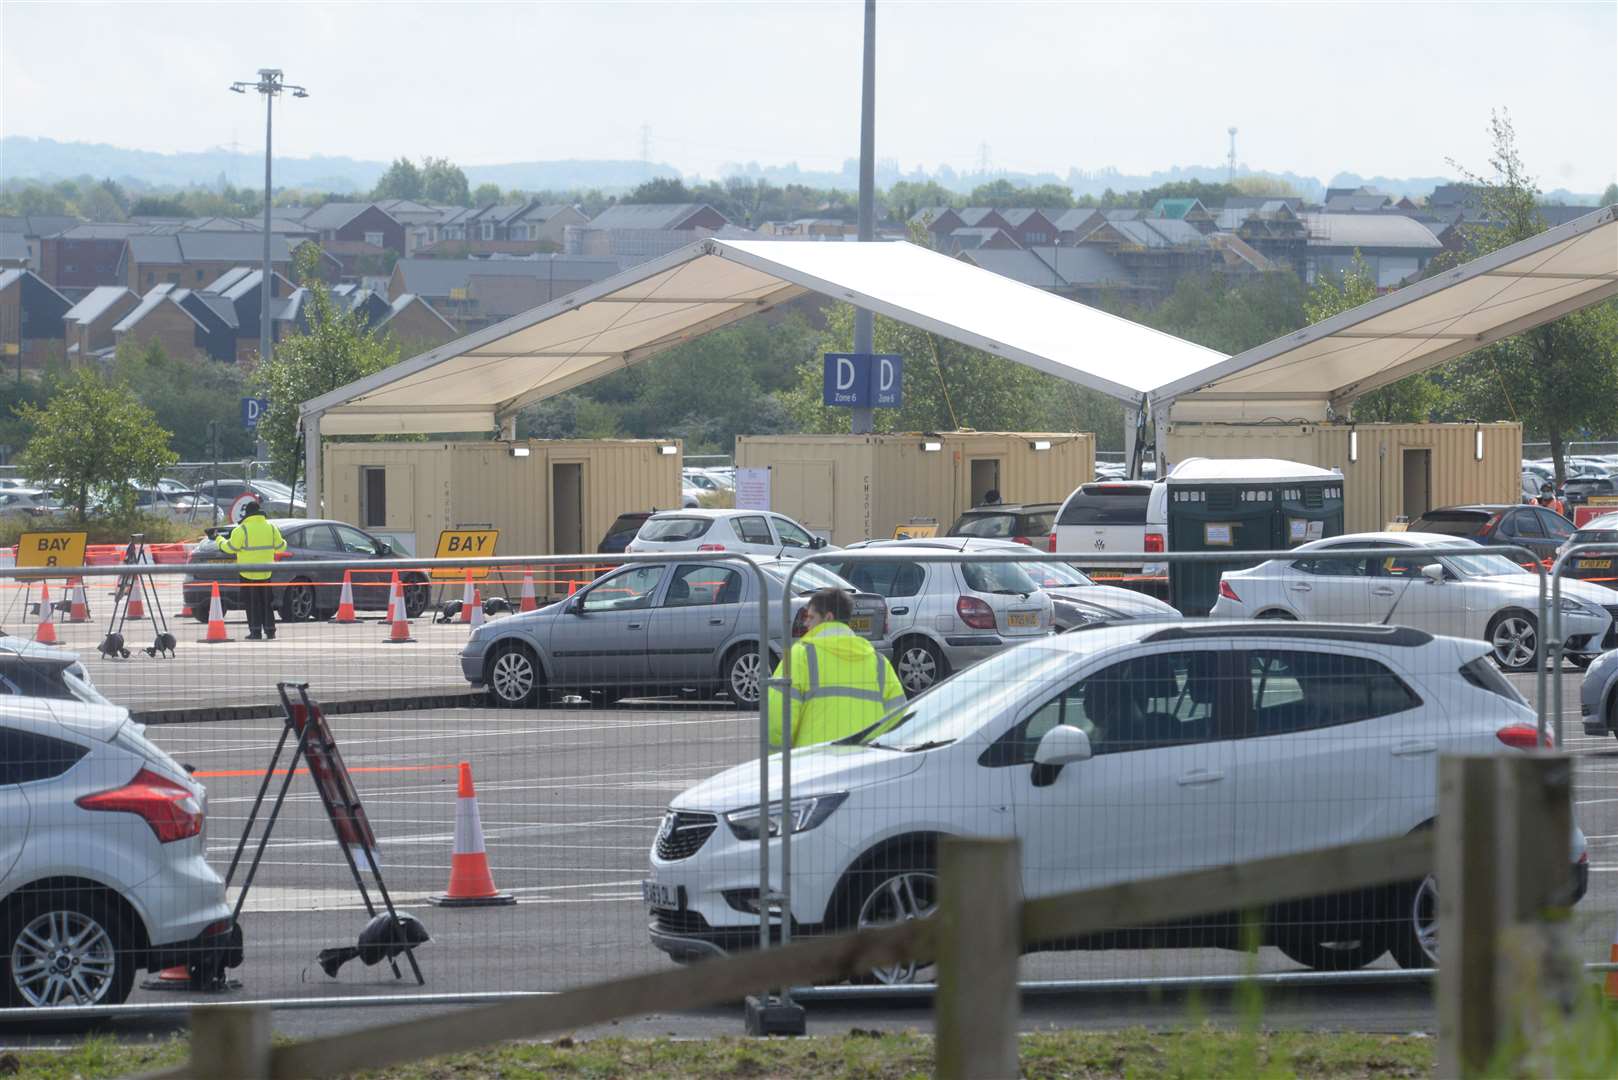 The coronavirus testing centre which was set up in one of the car parks at Ebbsfleet International. Picture: Chris Davey